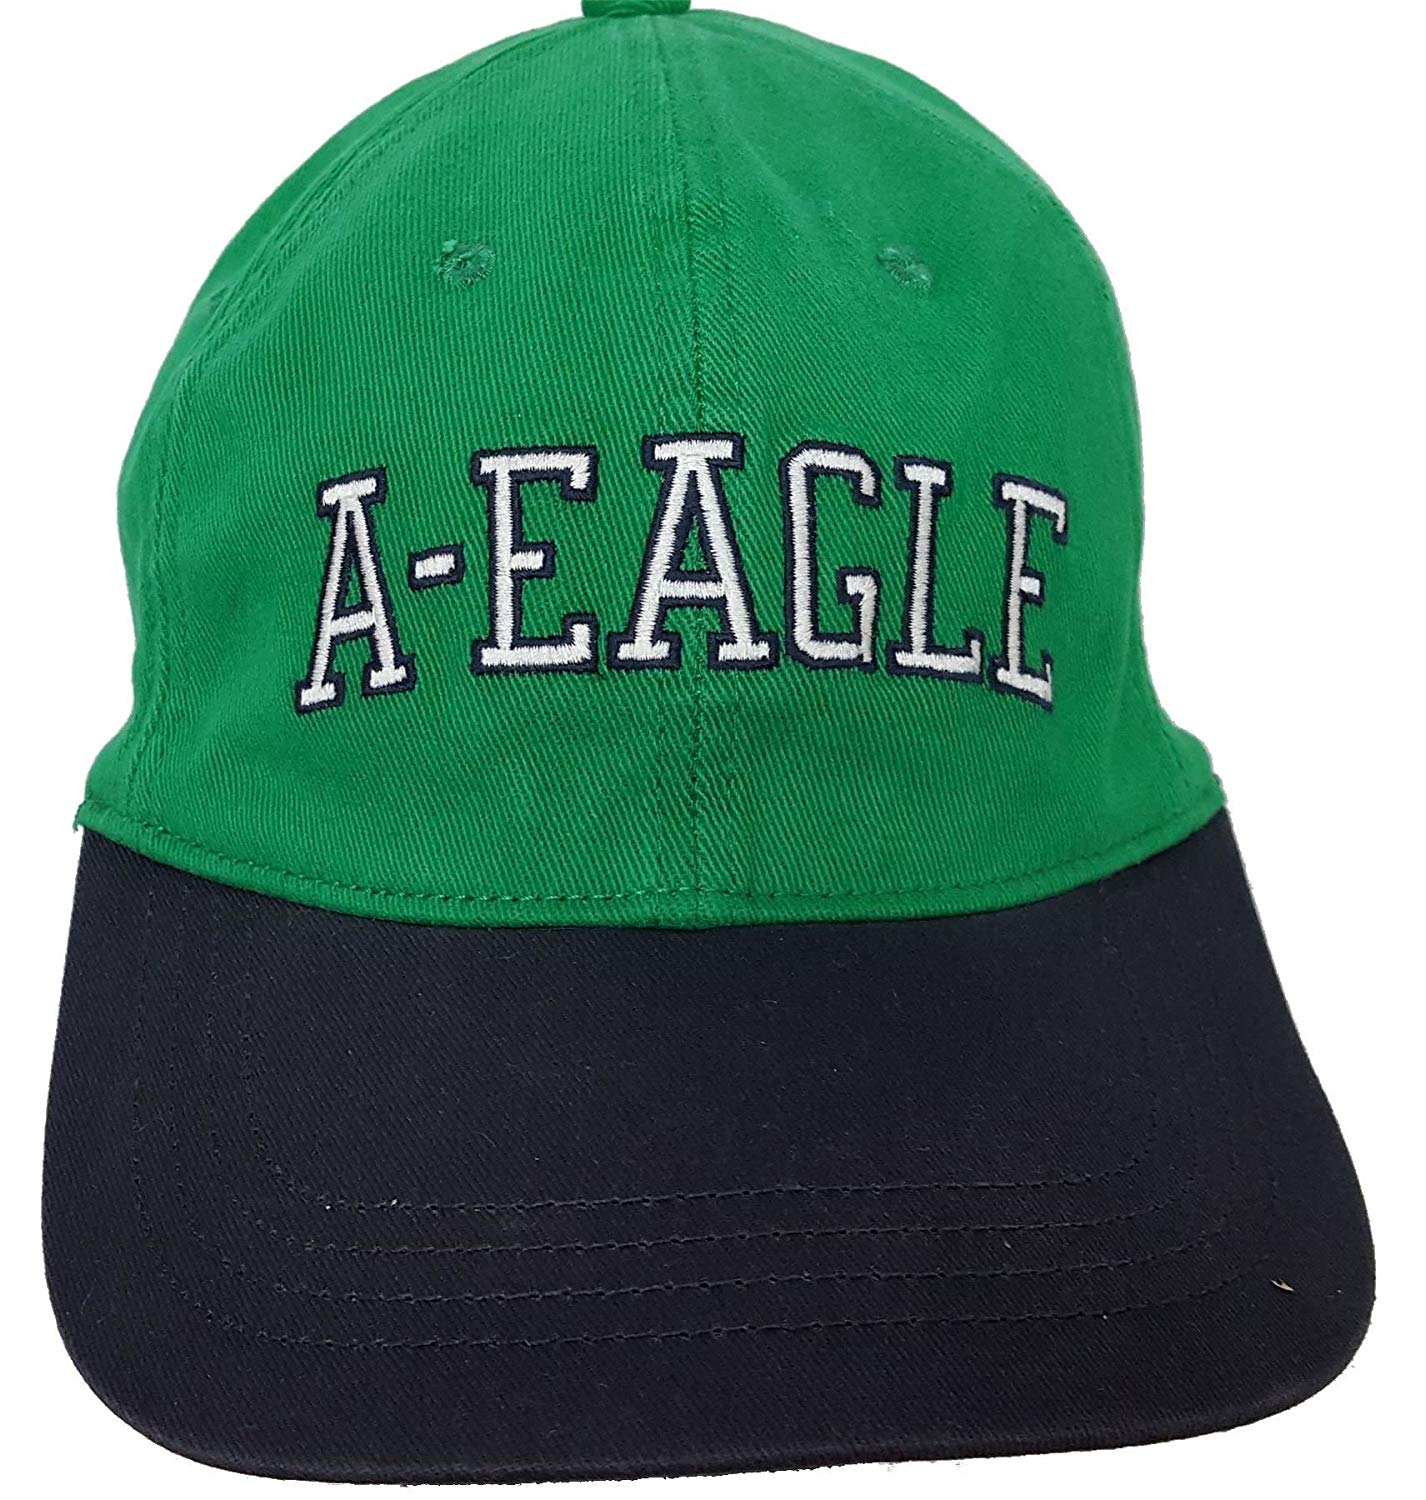 Green w Logo - American Eagle Outfitters Green W/ White A EAGLE Logo Navy Bill